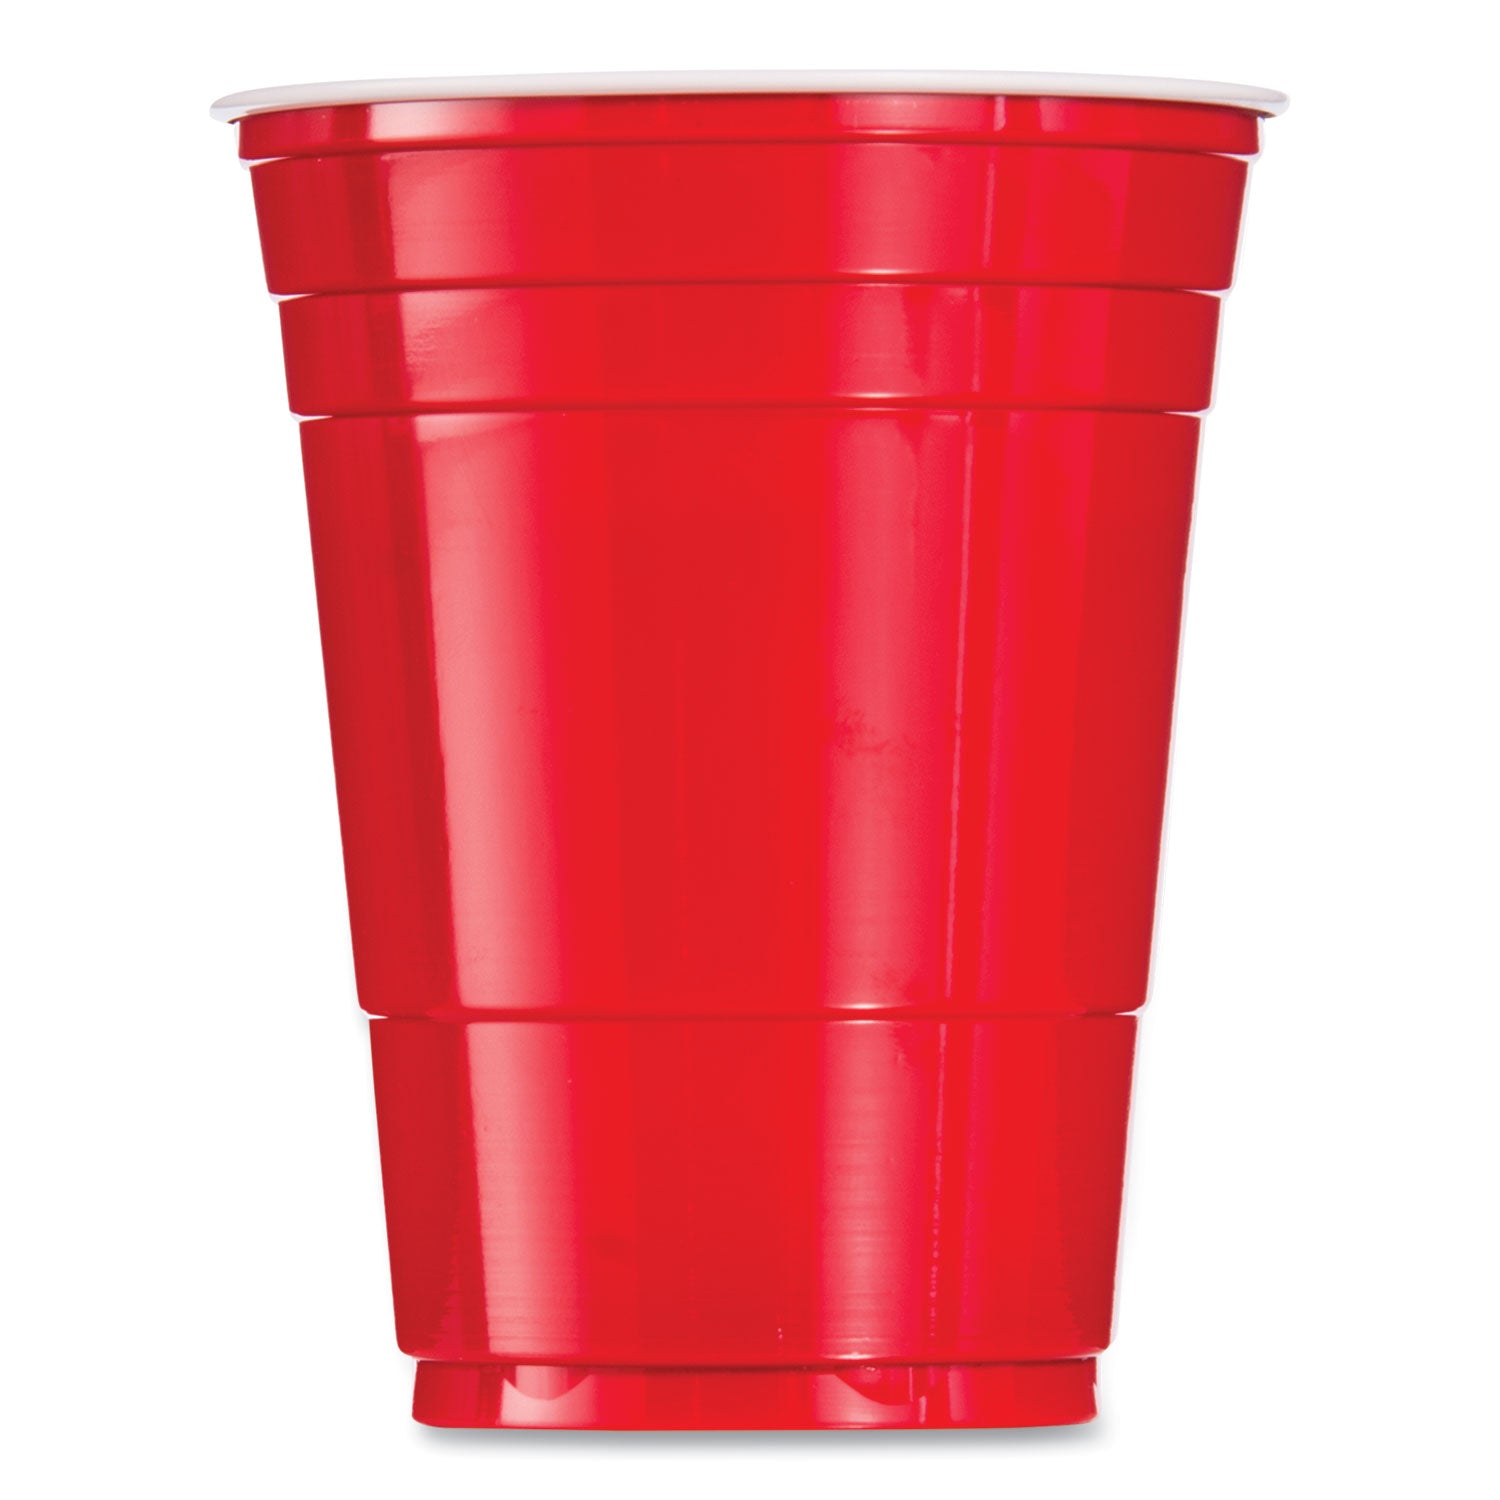 solo-party-plastic-cold-drink-cups-16-oz-red-288-carton_sccy16120001 - 3